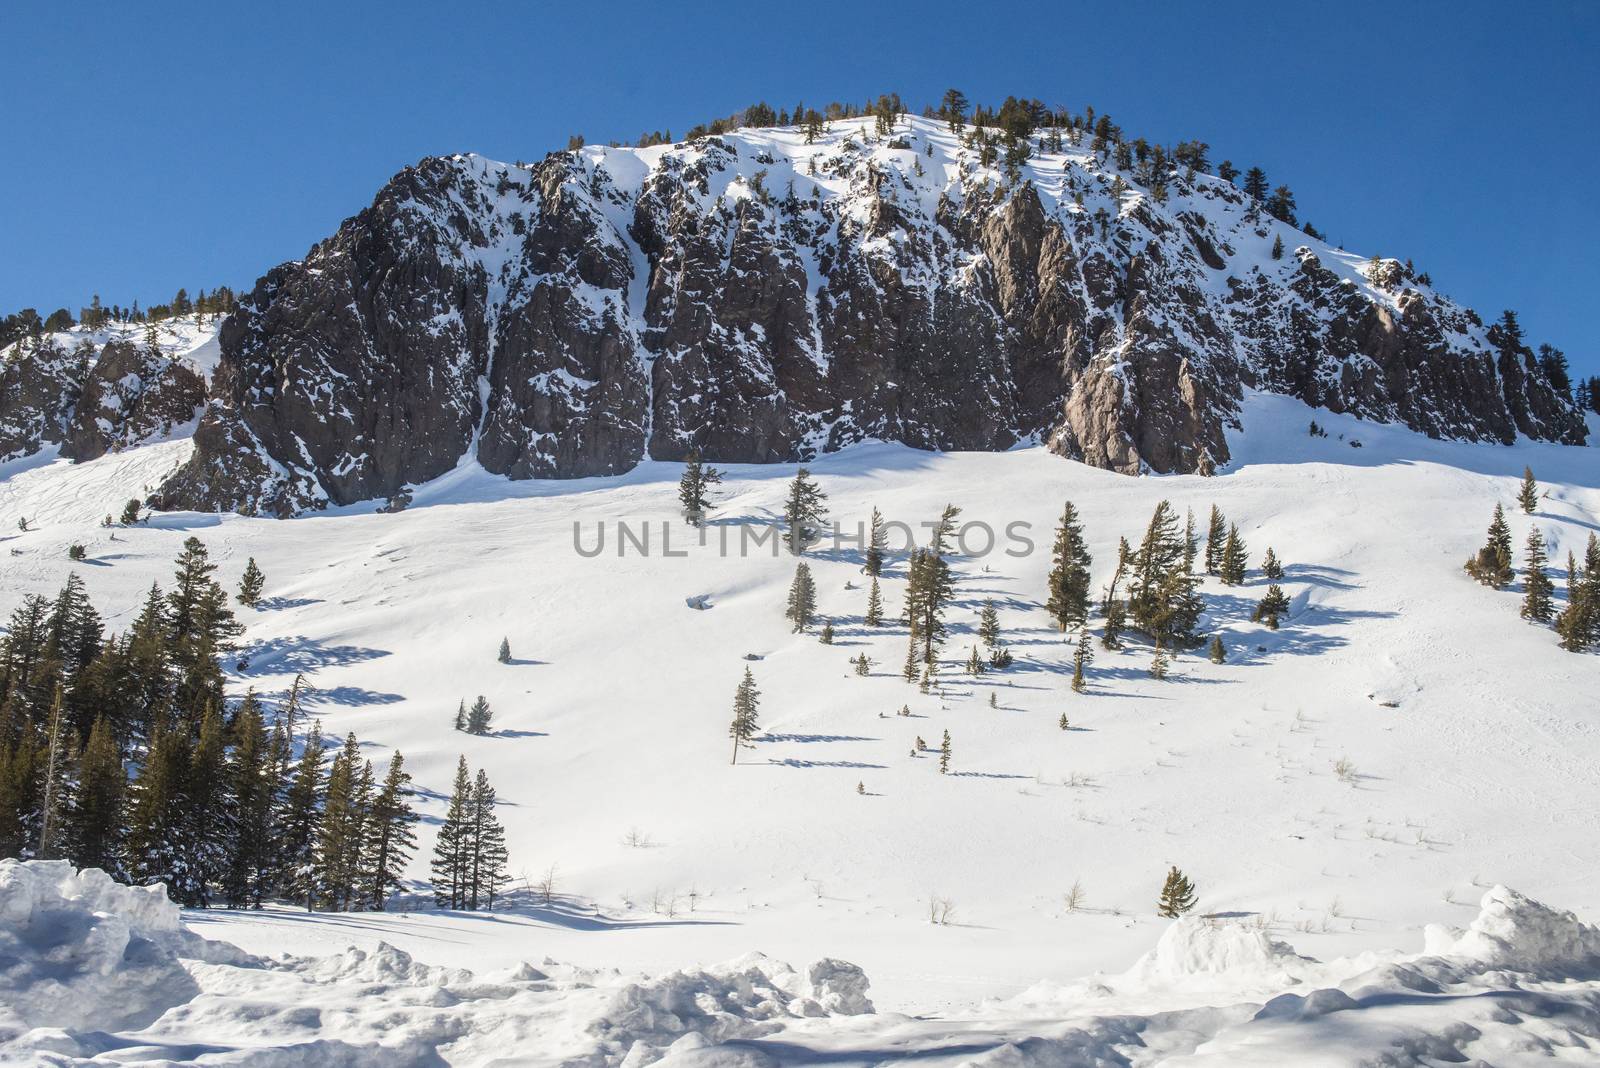 View of the snow-covered hill with pine trees in Mammoth Lakes,  by Njean